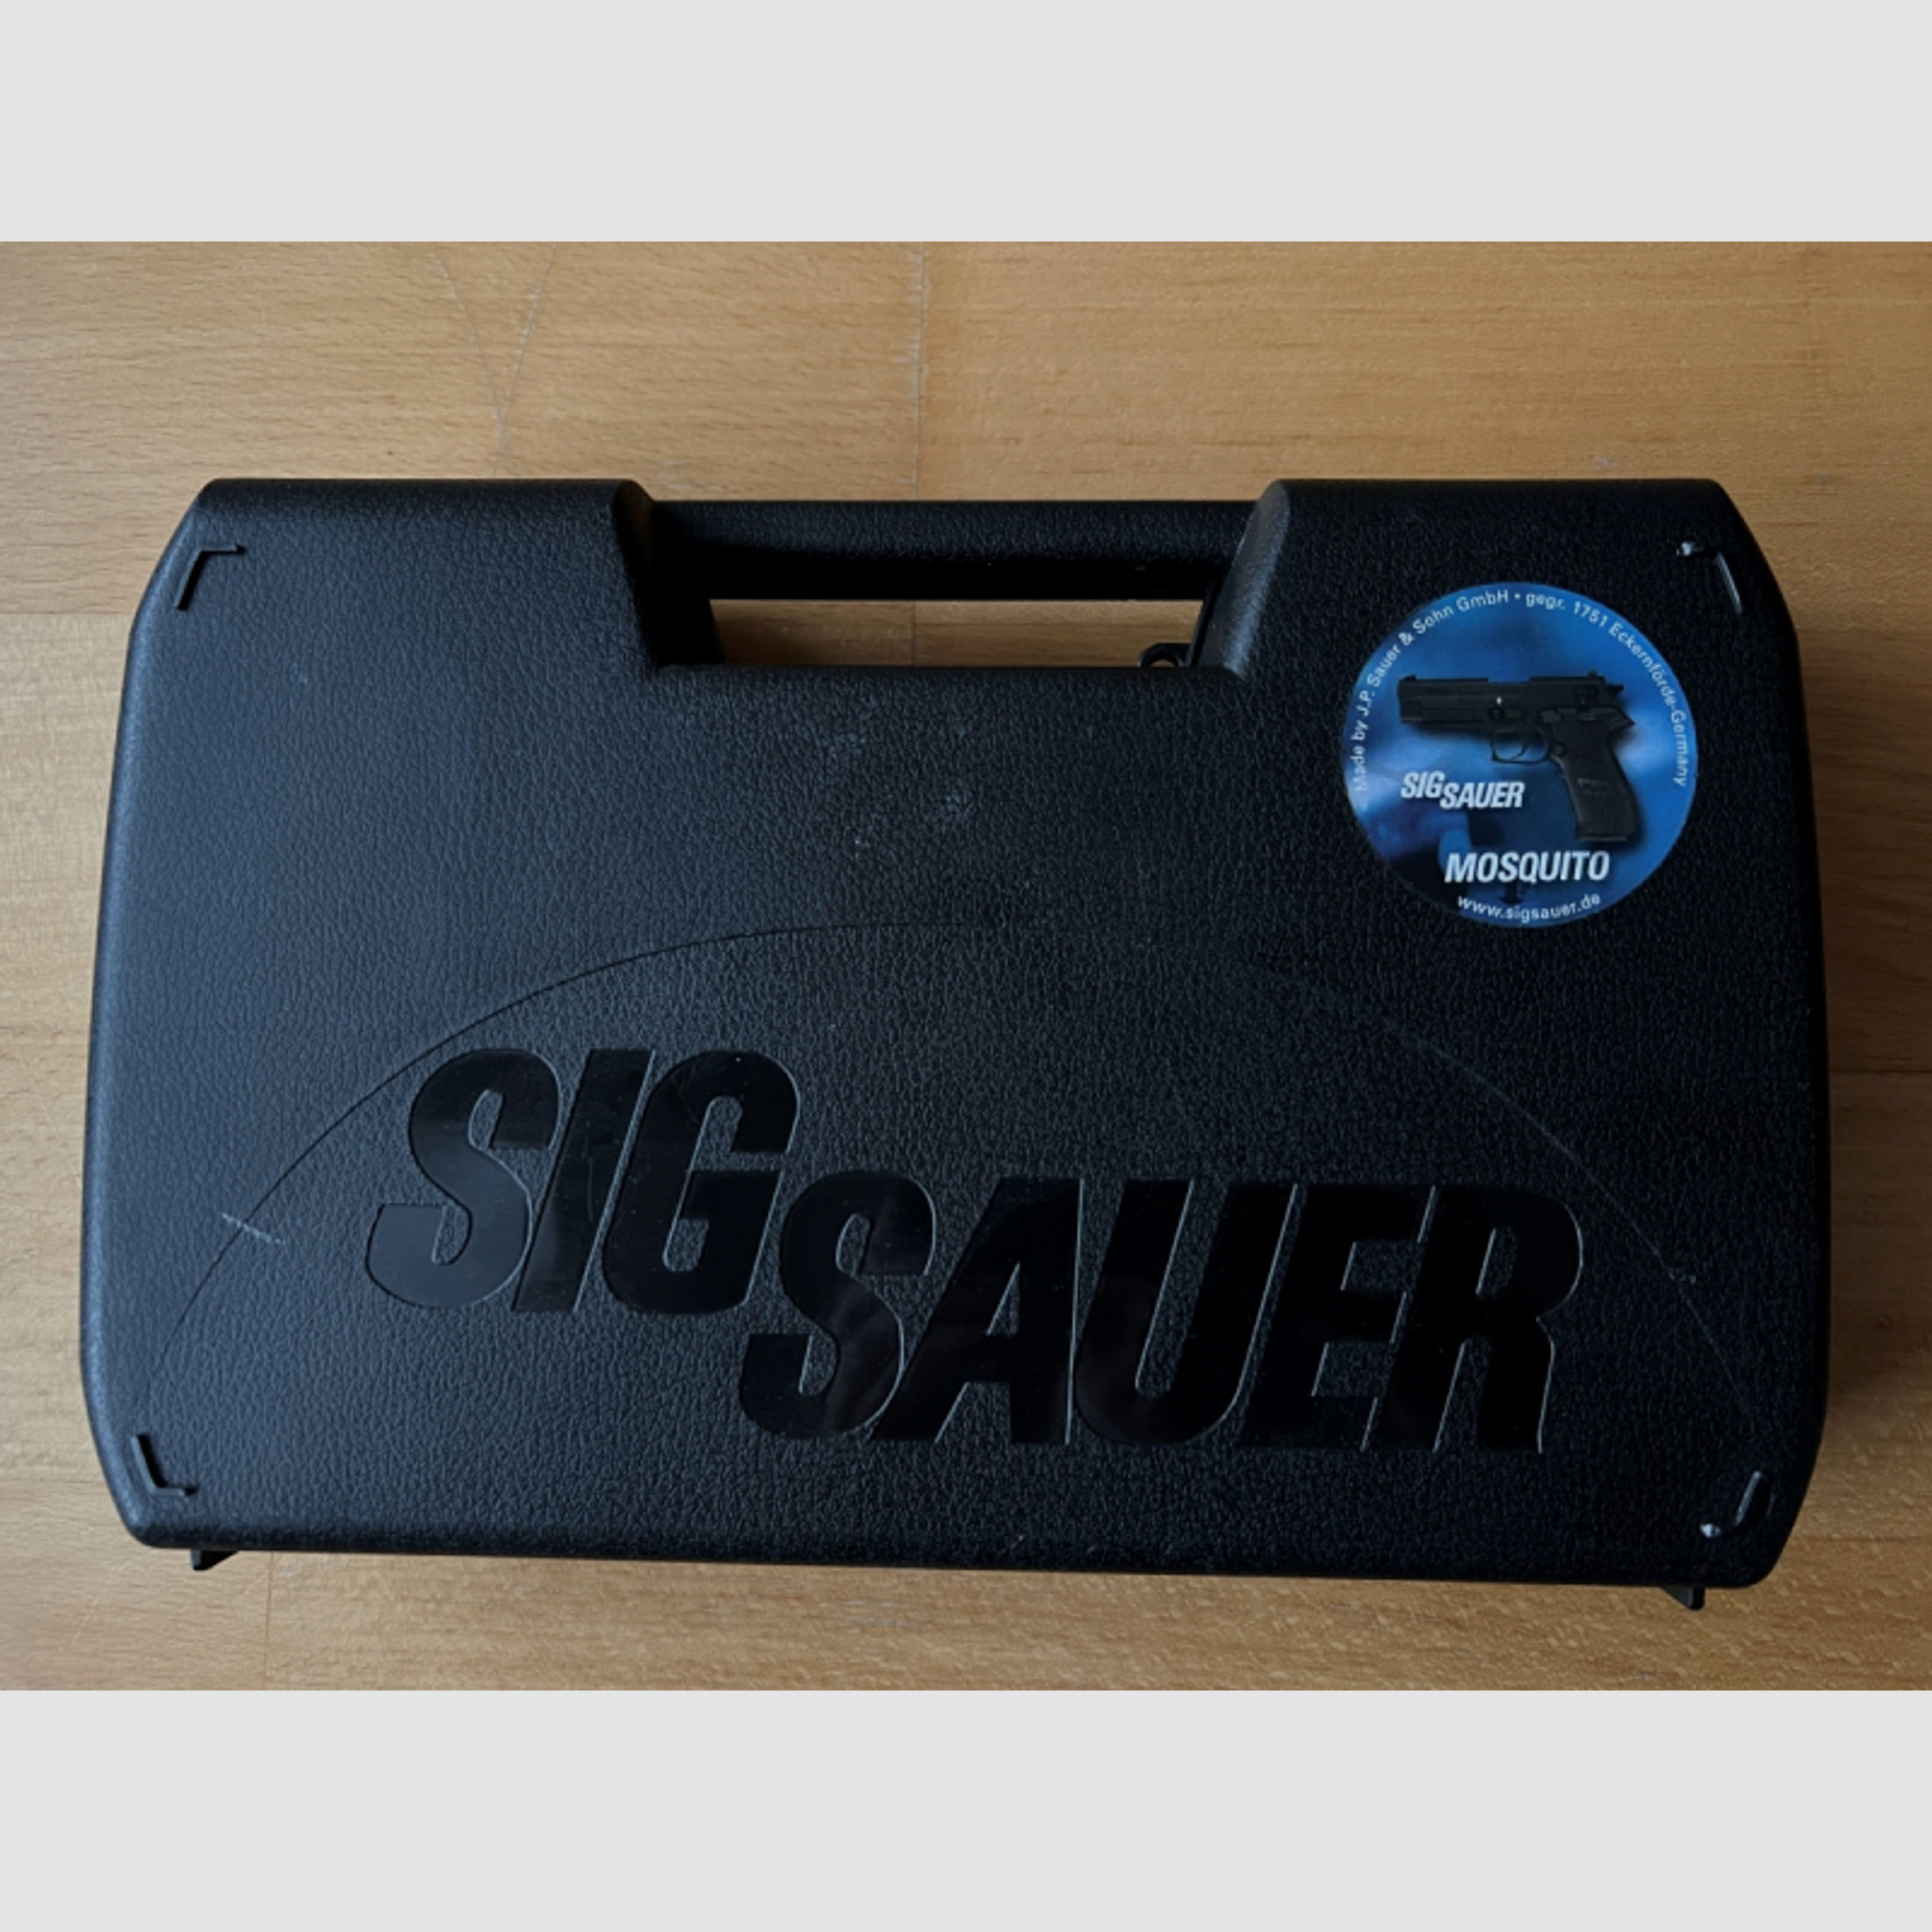 Sig Sauer Mosquito made in Germany im Kaliber .22lfB